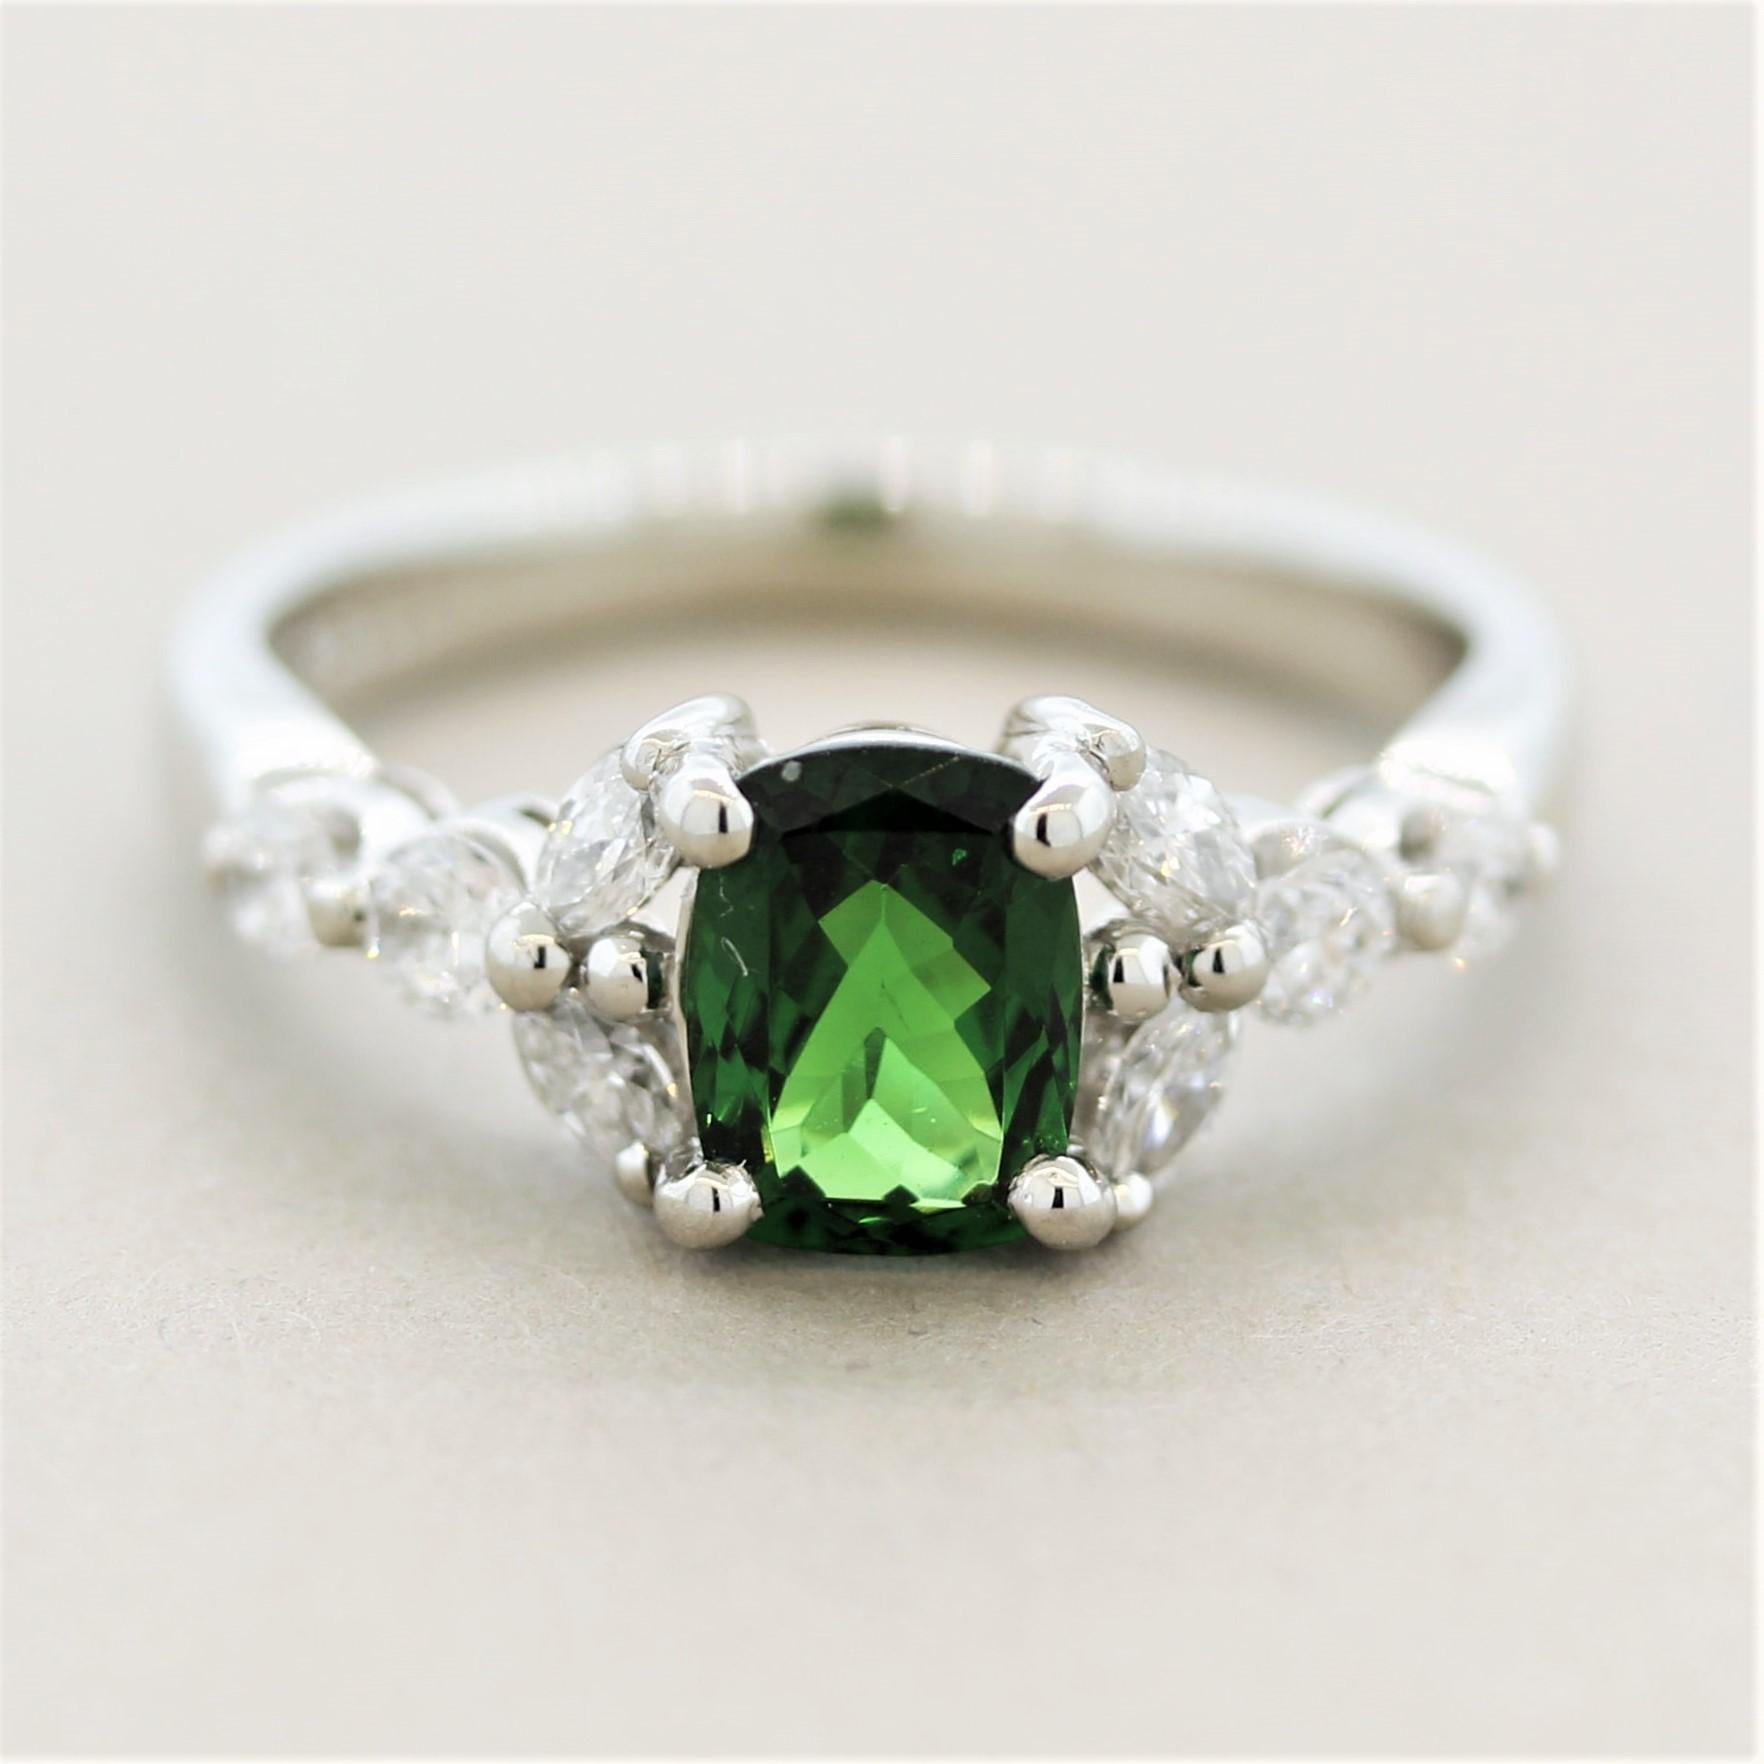 A gorgeous cushion-shaped tsavorite takes center stage! It weighs 0.97 carats and has a vivid rich green color seen in fine tsavorites. It is accented by 0.43 carats of round brilliant-cut and marquise-shaped diamonds. Hand-fabricated in platinum,